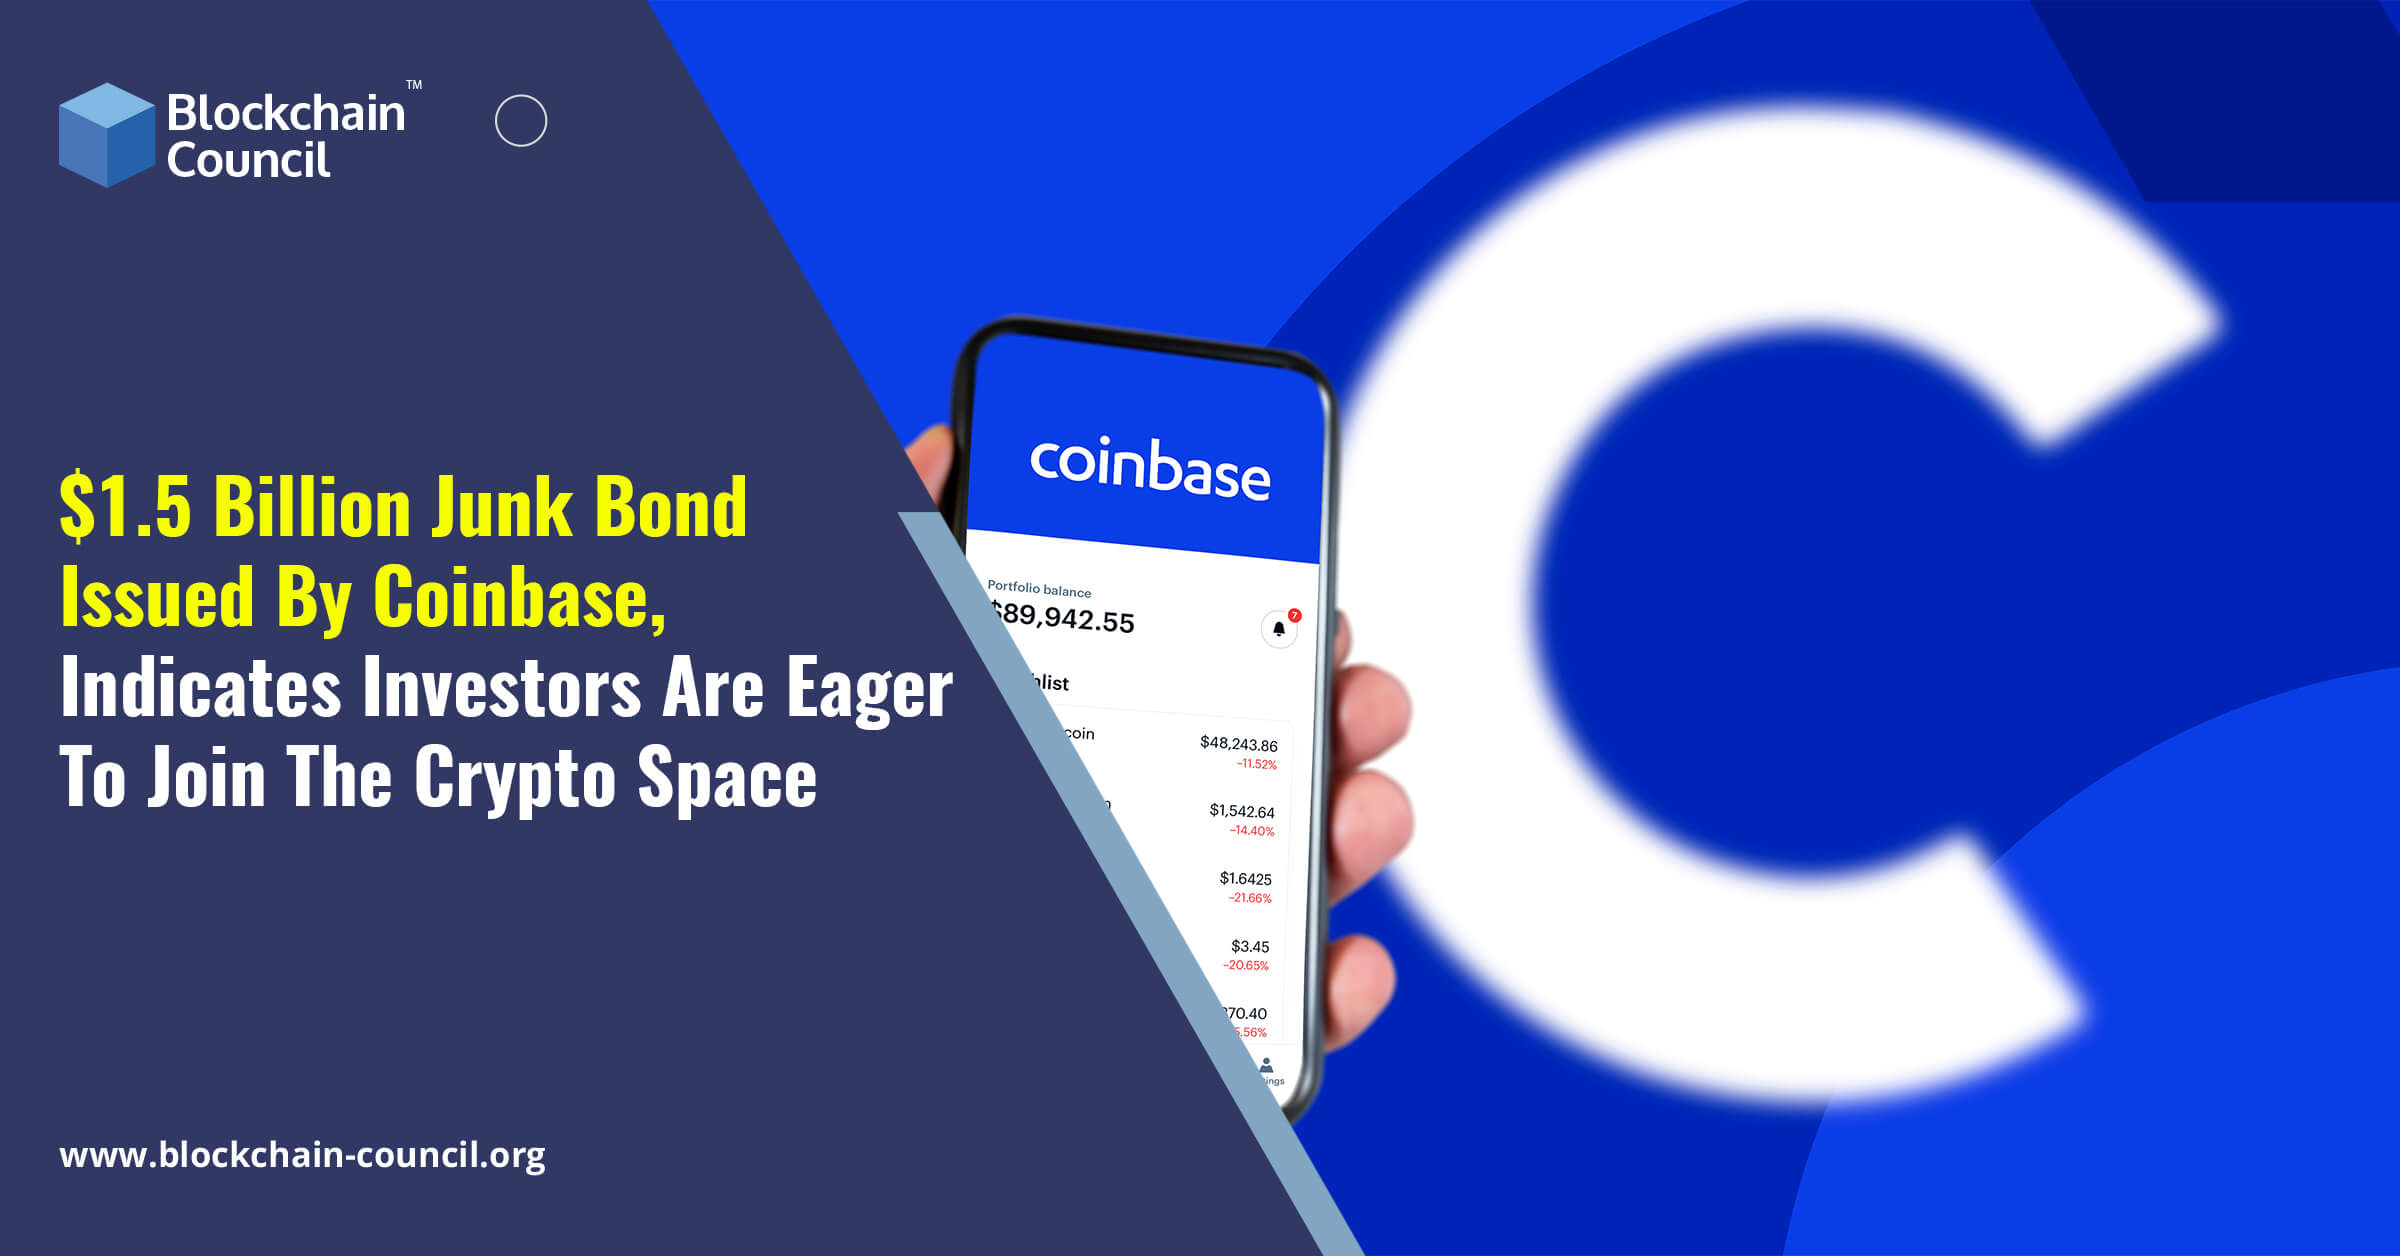 $1.5 Billion Junk Bond Issued By Coinbase, Indicates Investors Are Eager To Join The Crypto Space